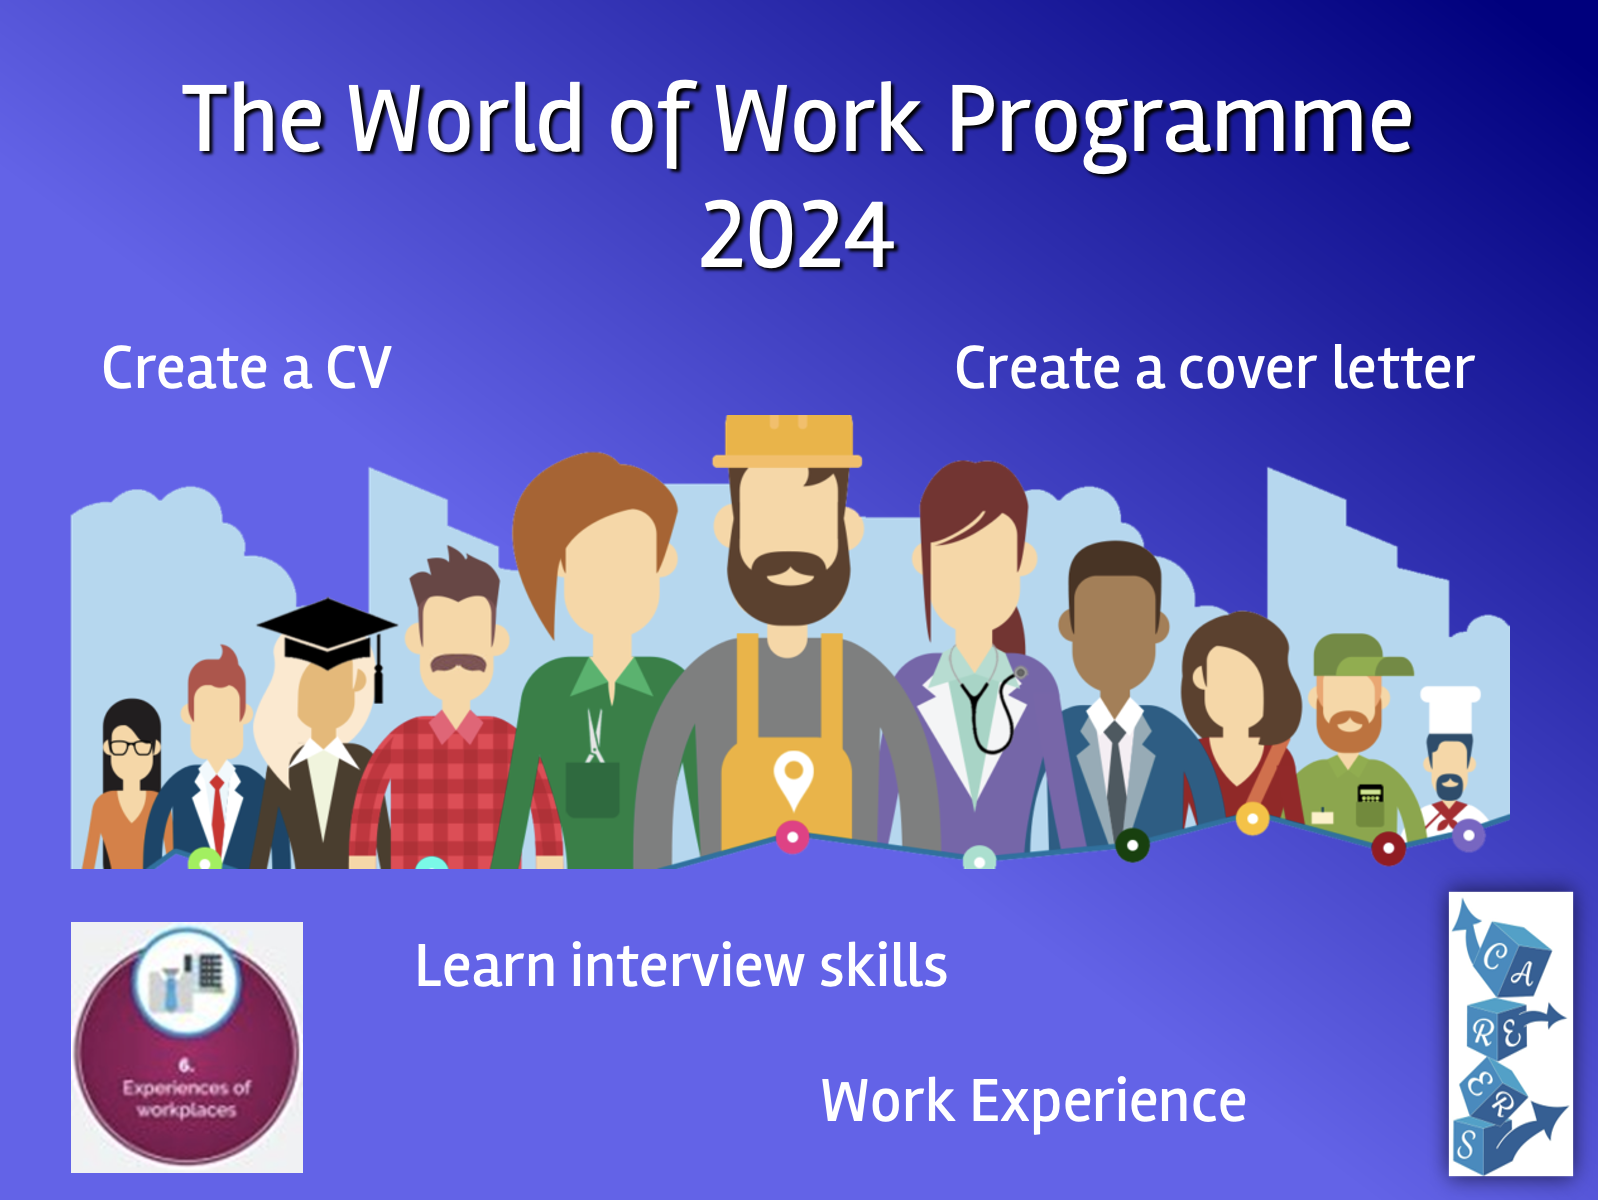 The World of Work Programme 2023